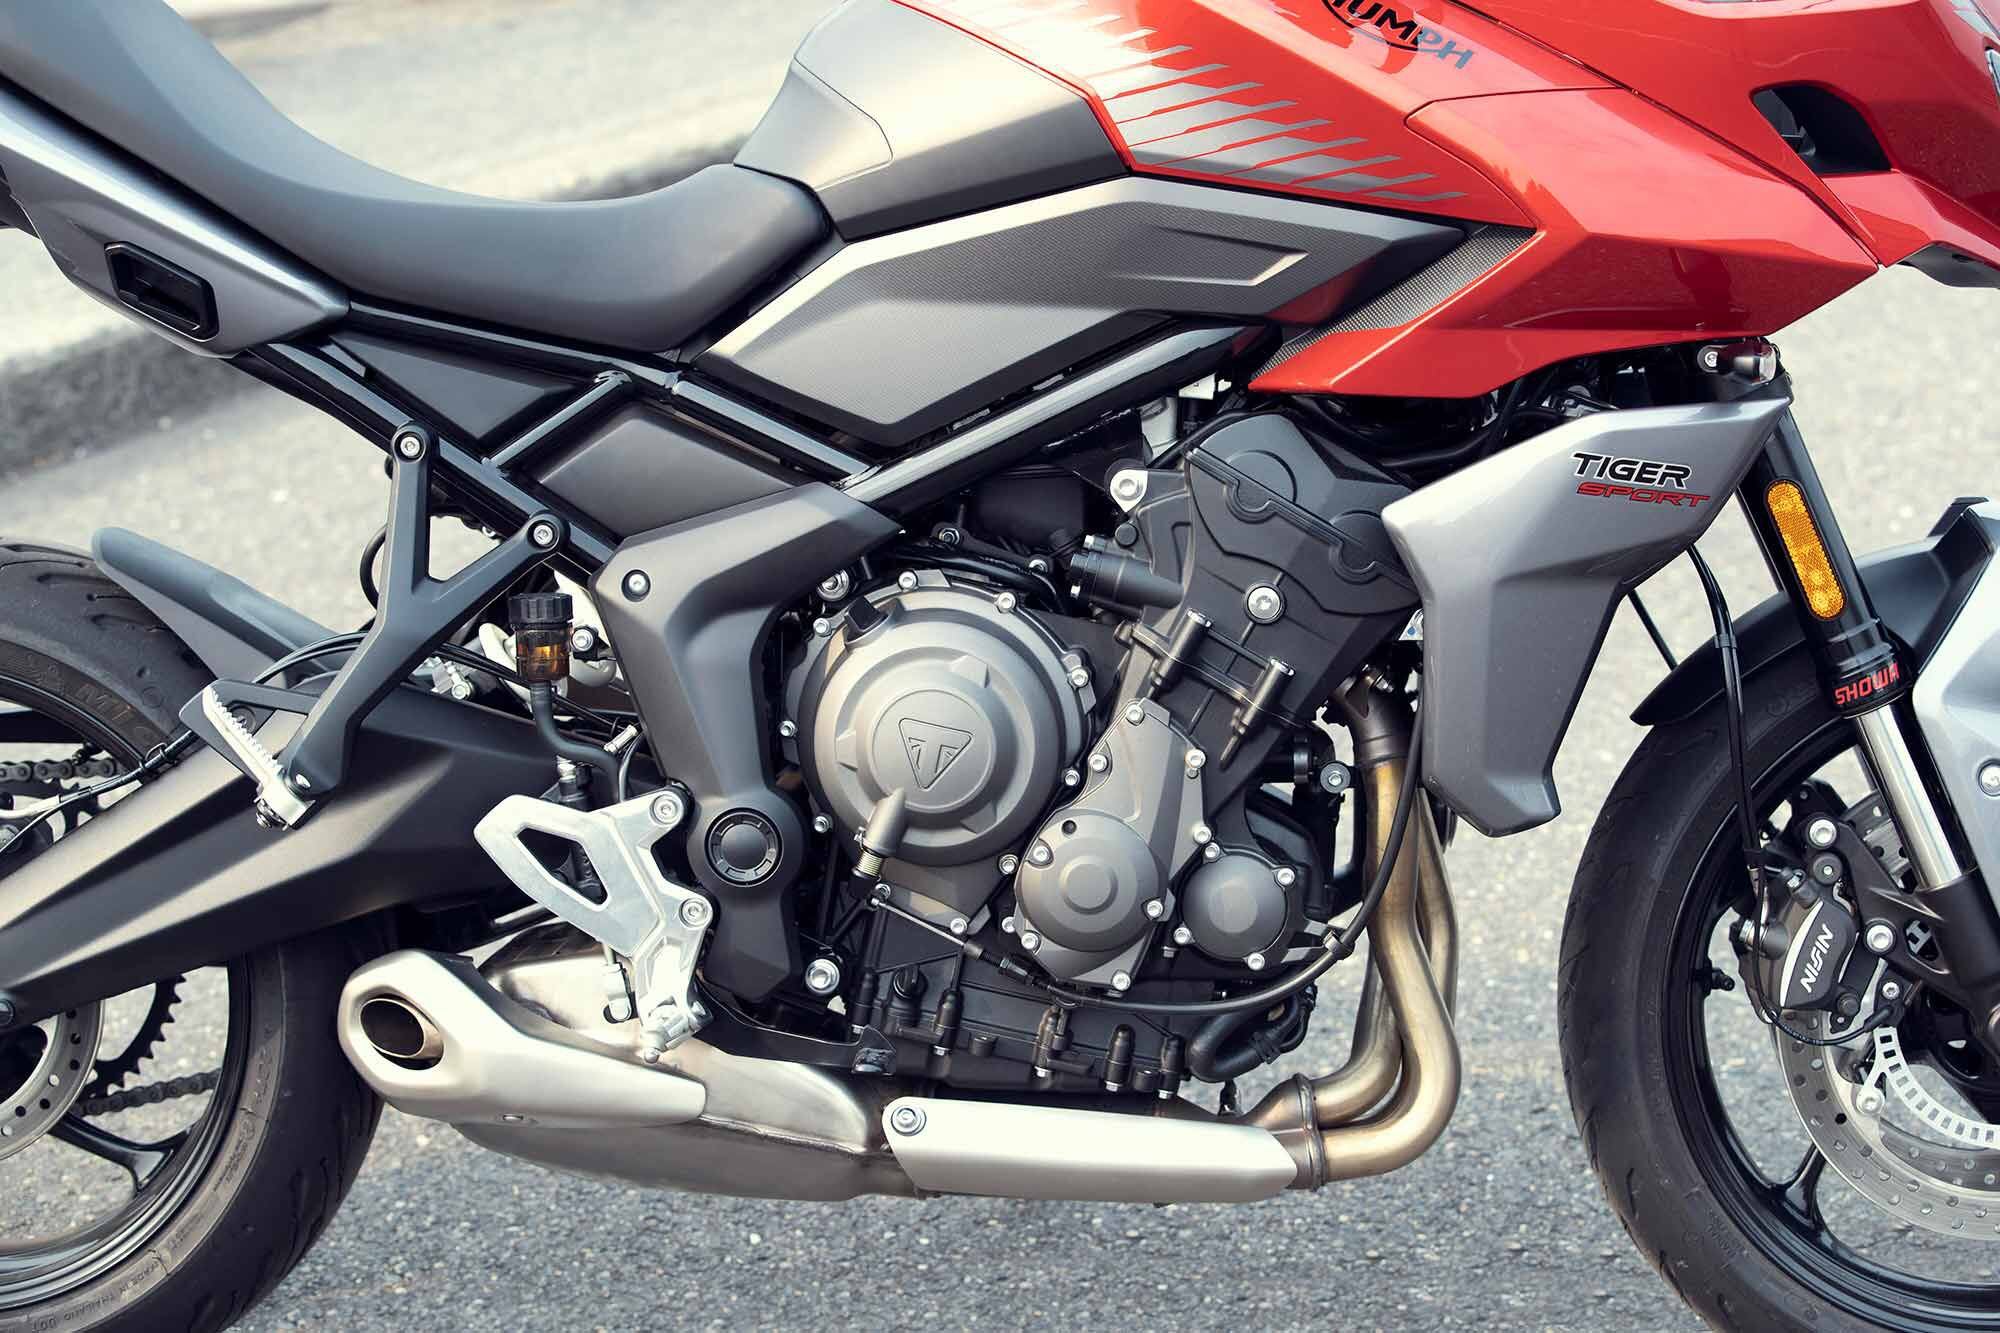 Firepower? Triumph’s DOHC 659cc inline-triple engine as seen in the Trident 660. Beware: The triple trumpet exhaust note is addicting!